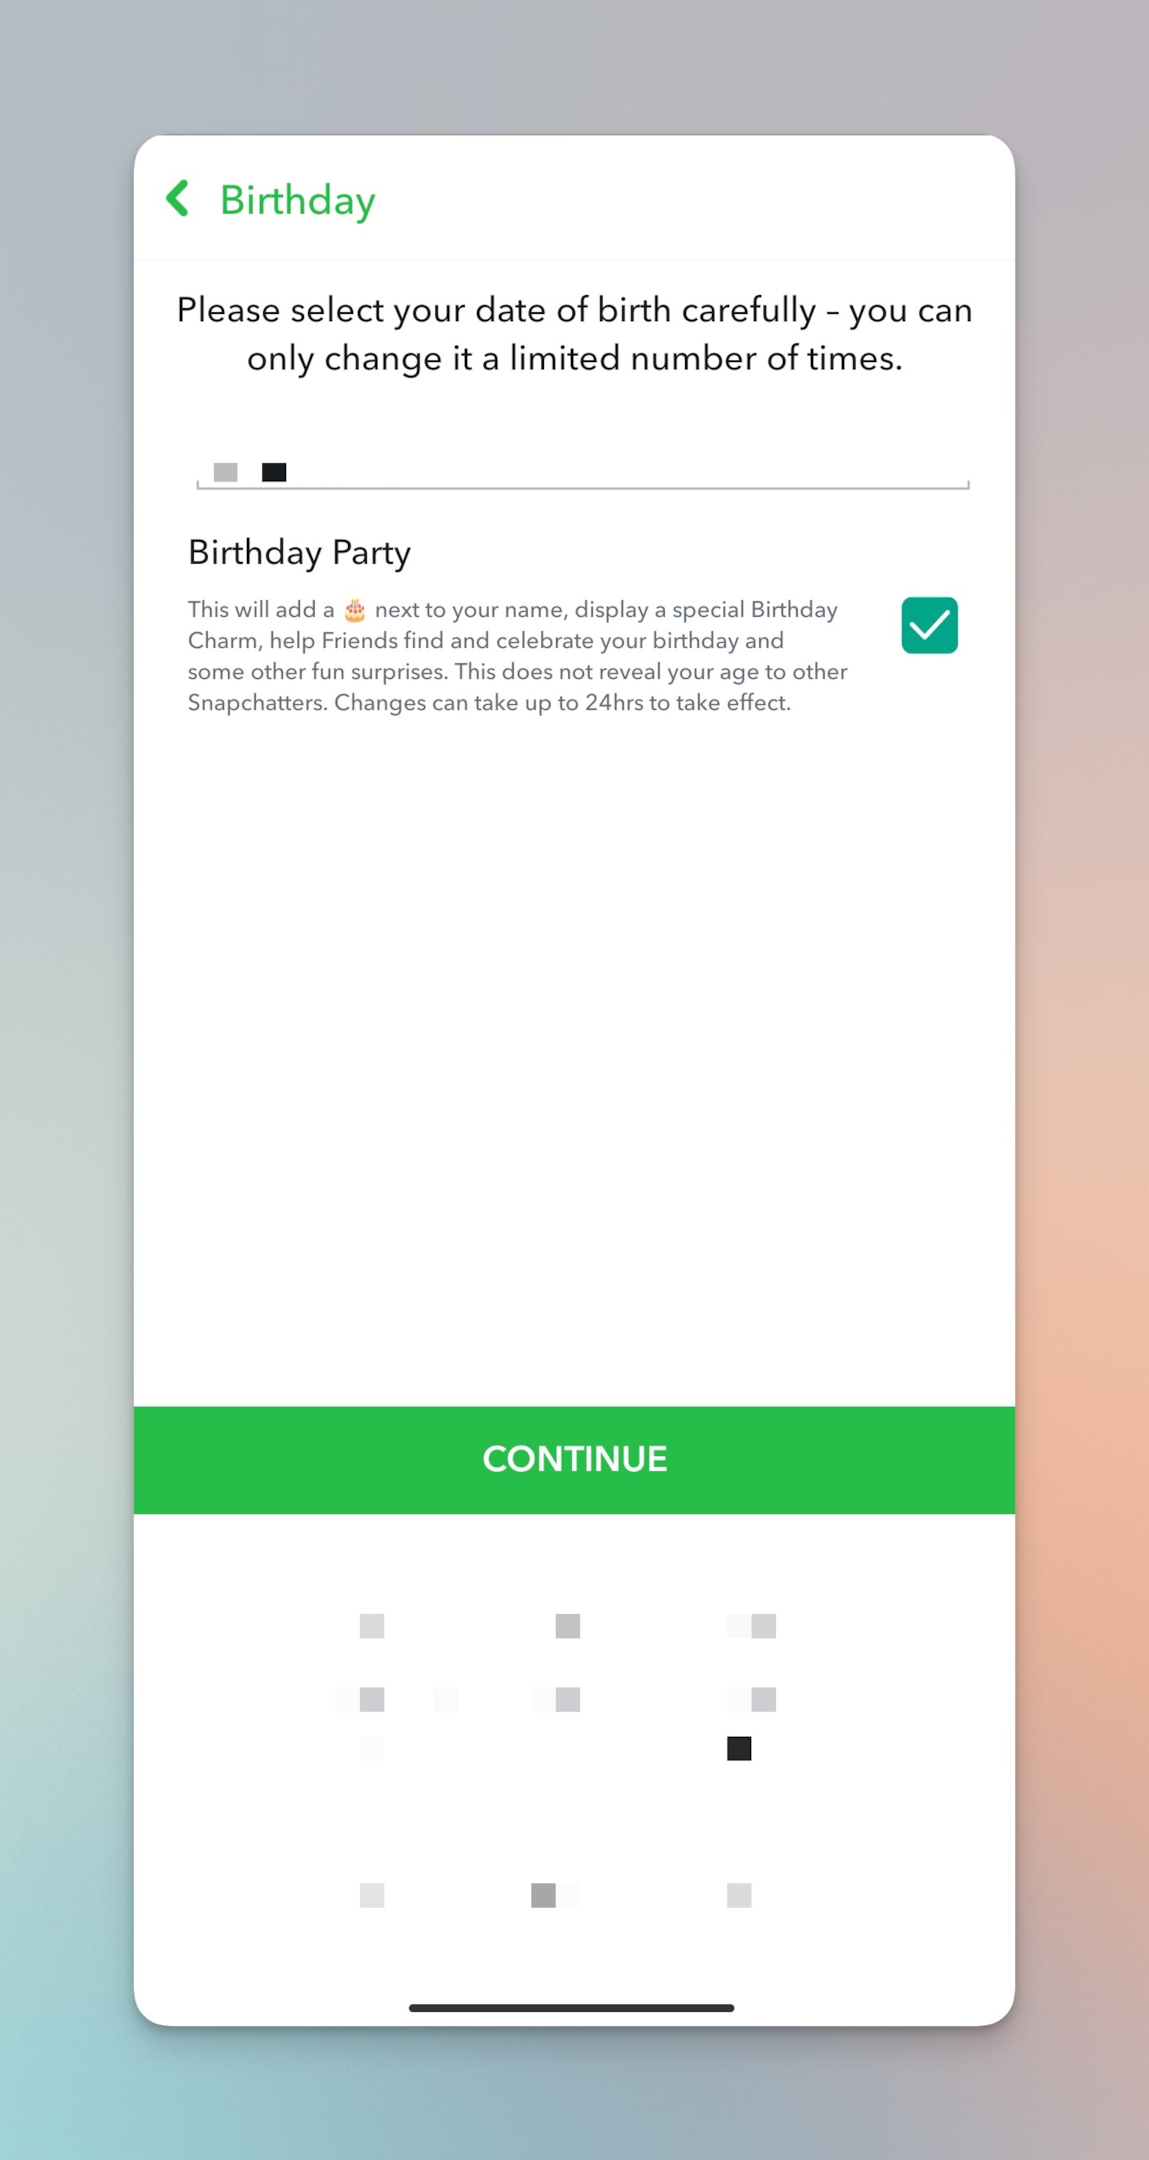 Remote.tools shows the birthday page (along with birthday year) on Snapchat account 